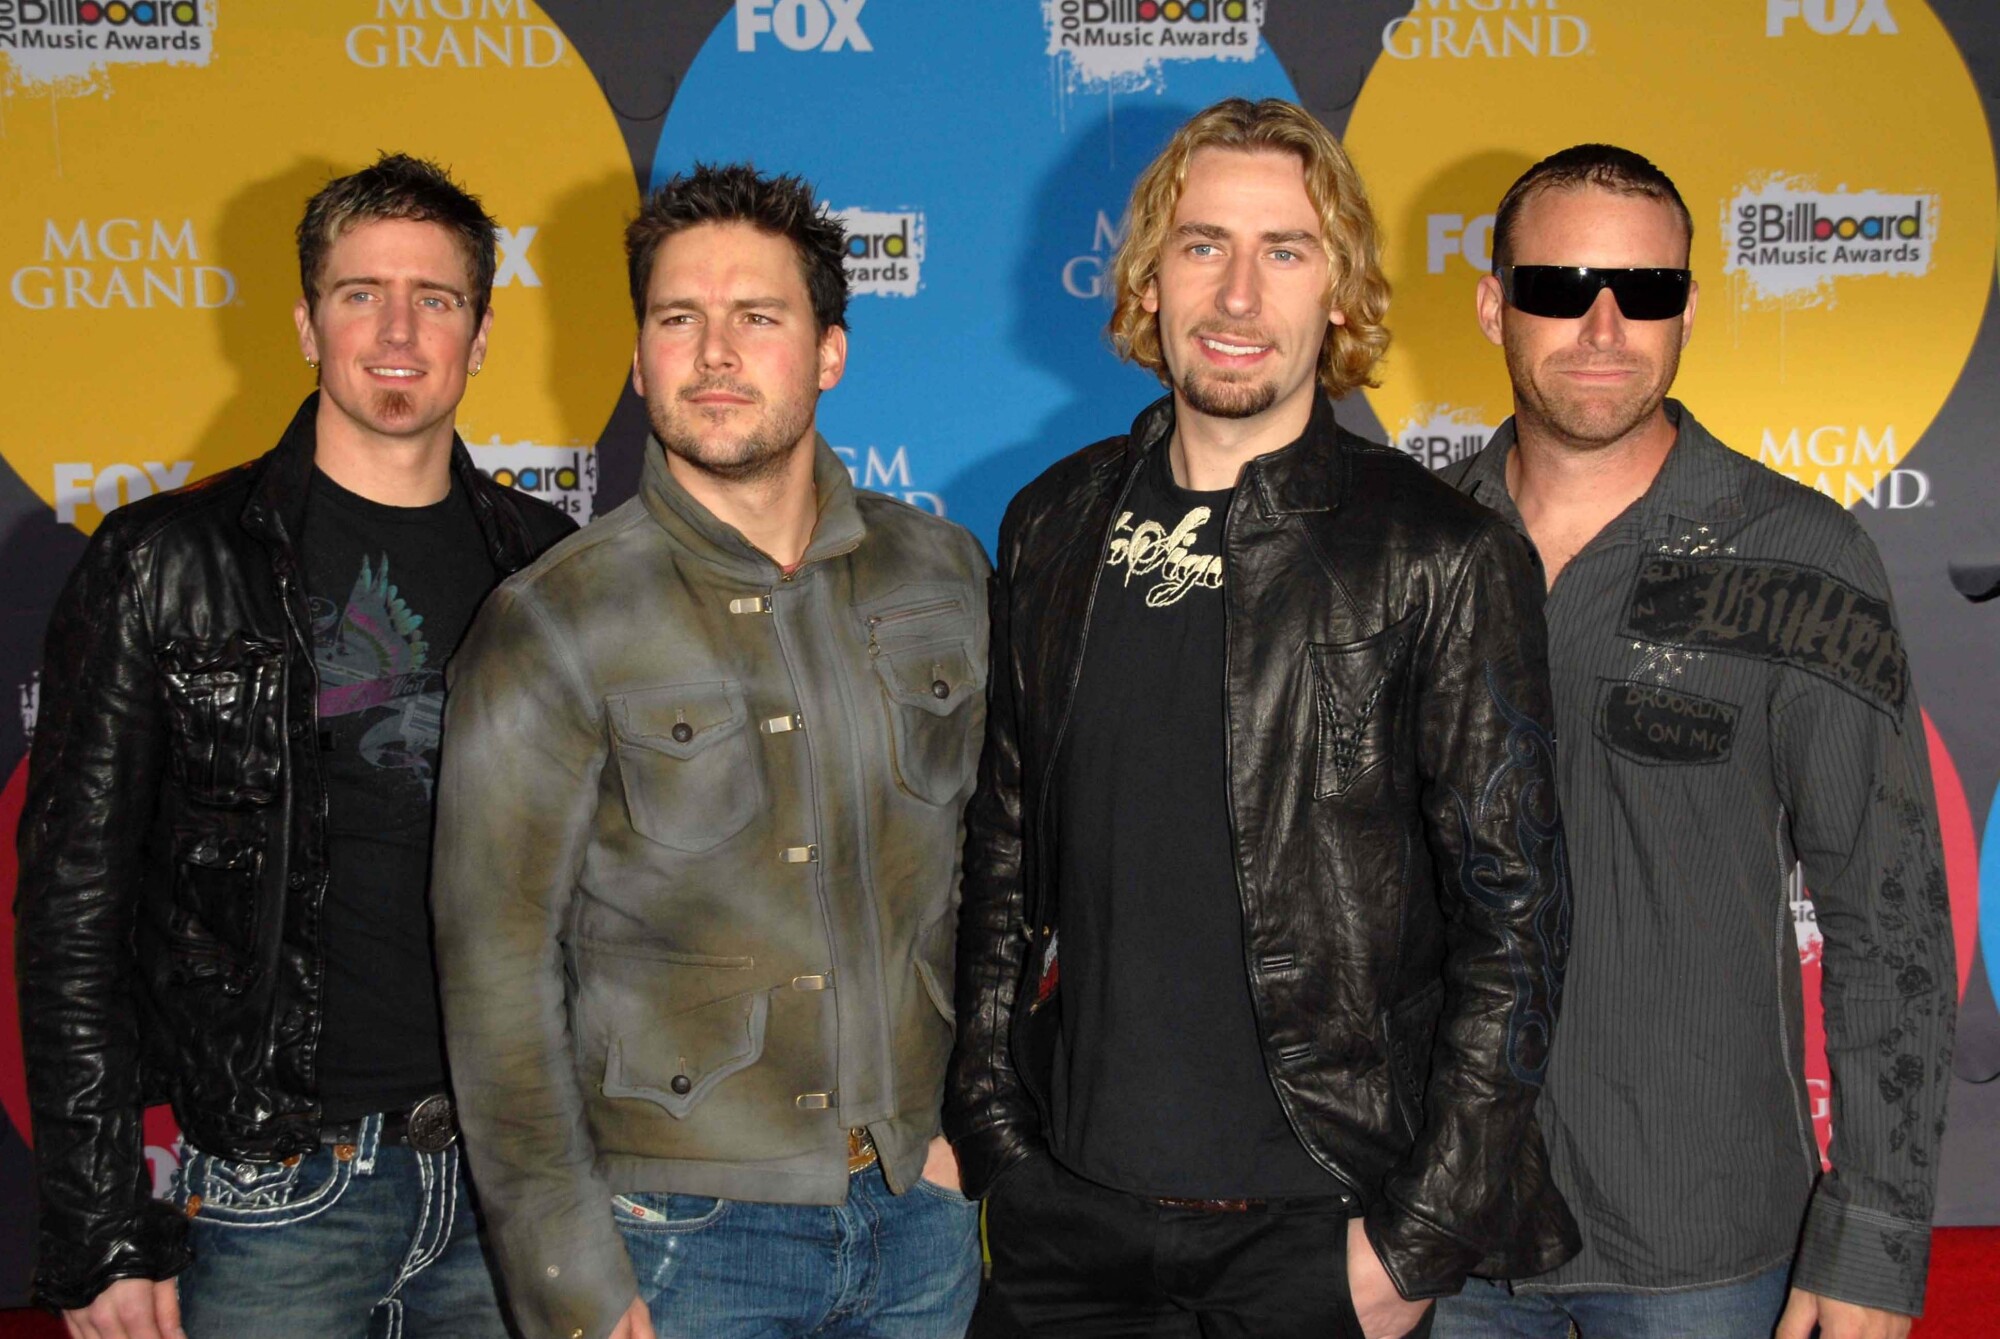 Members of the band Nickelback